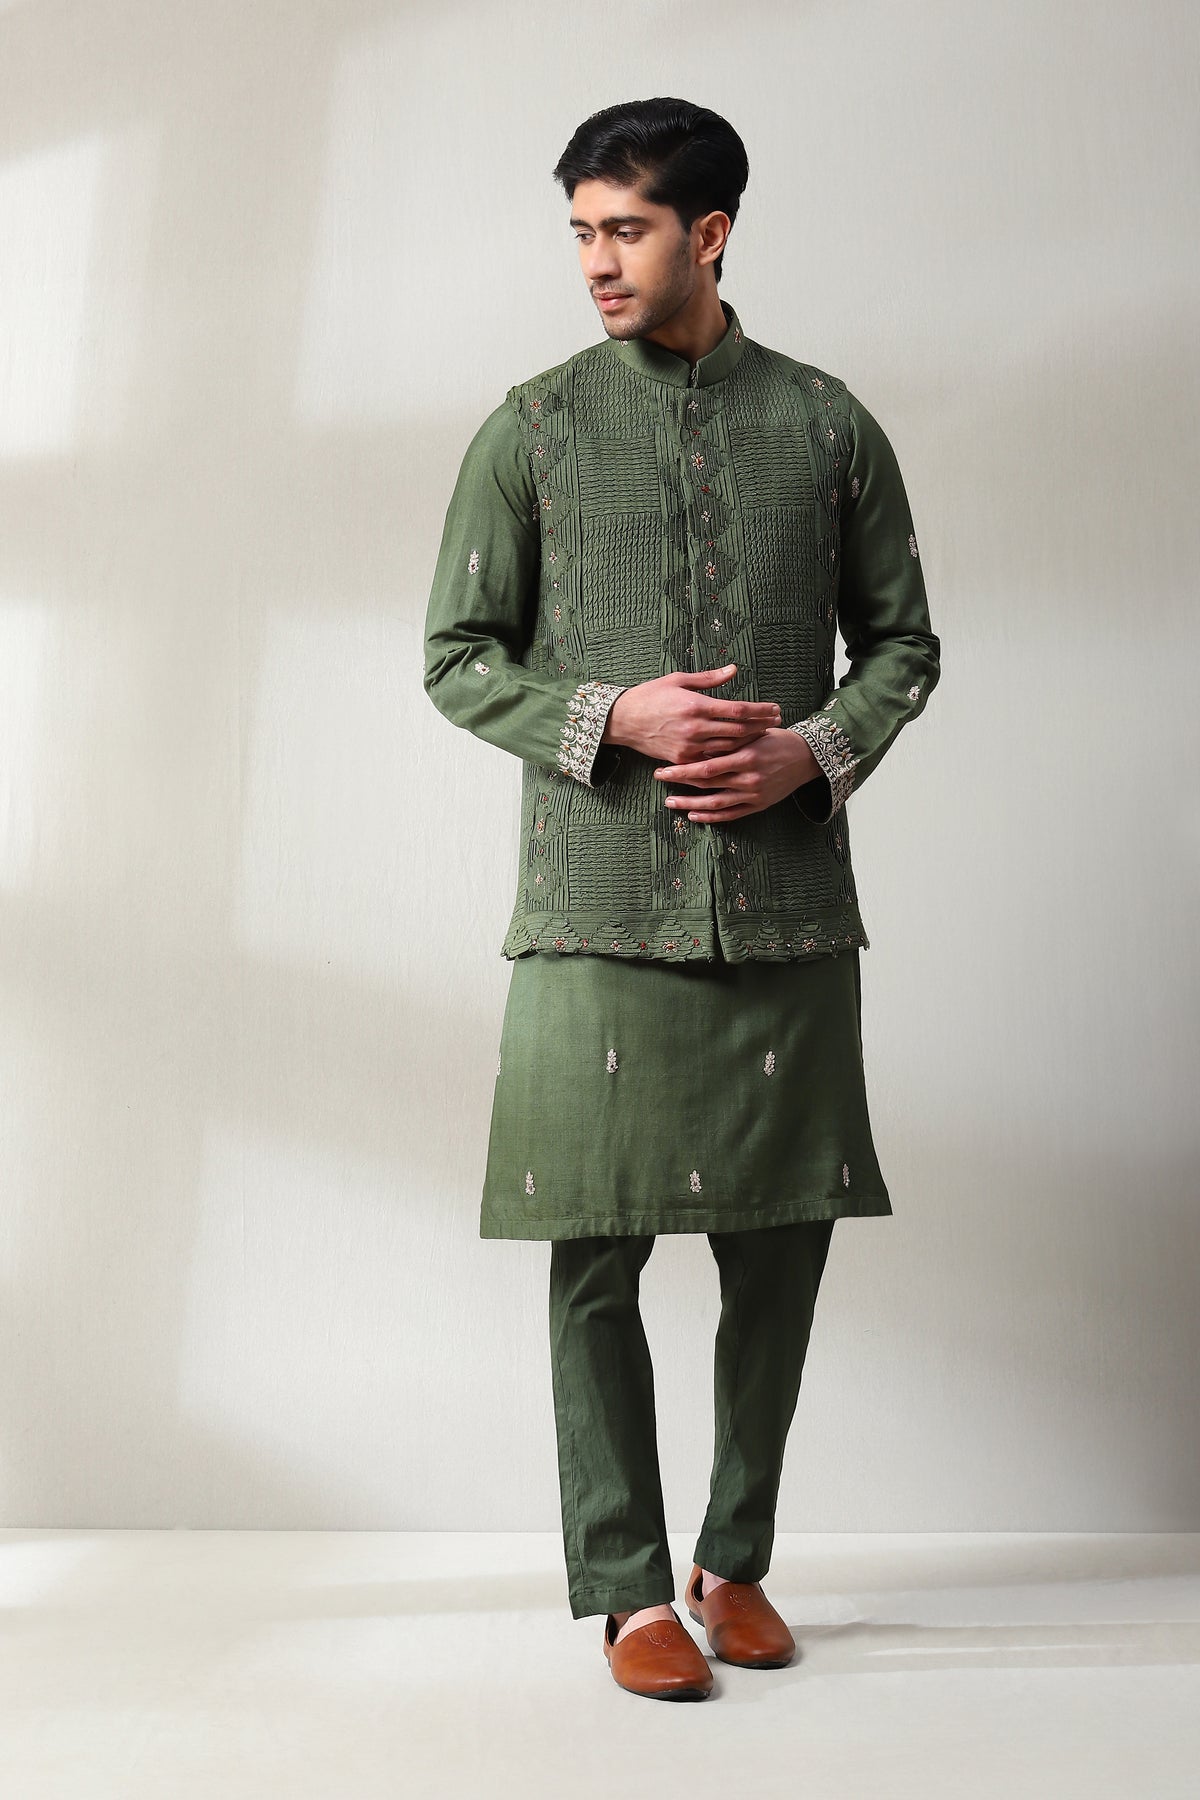 This patterned pleted handspun mehndi green  jacket with same color pants